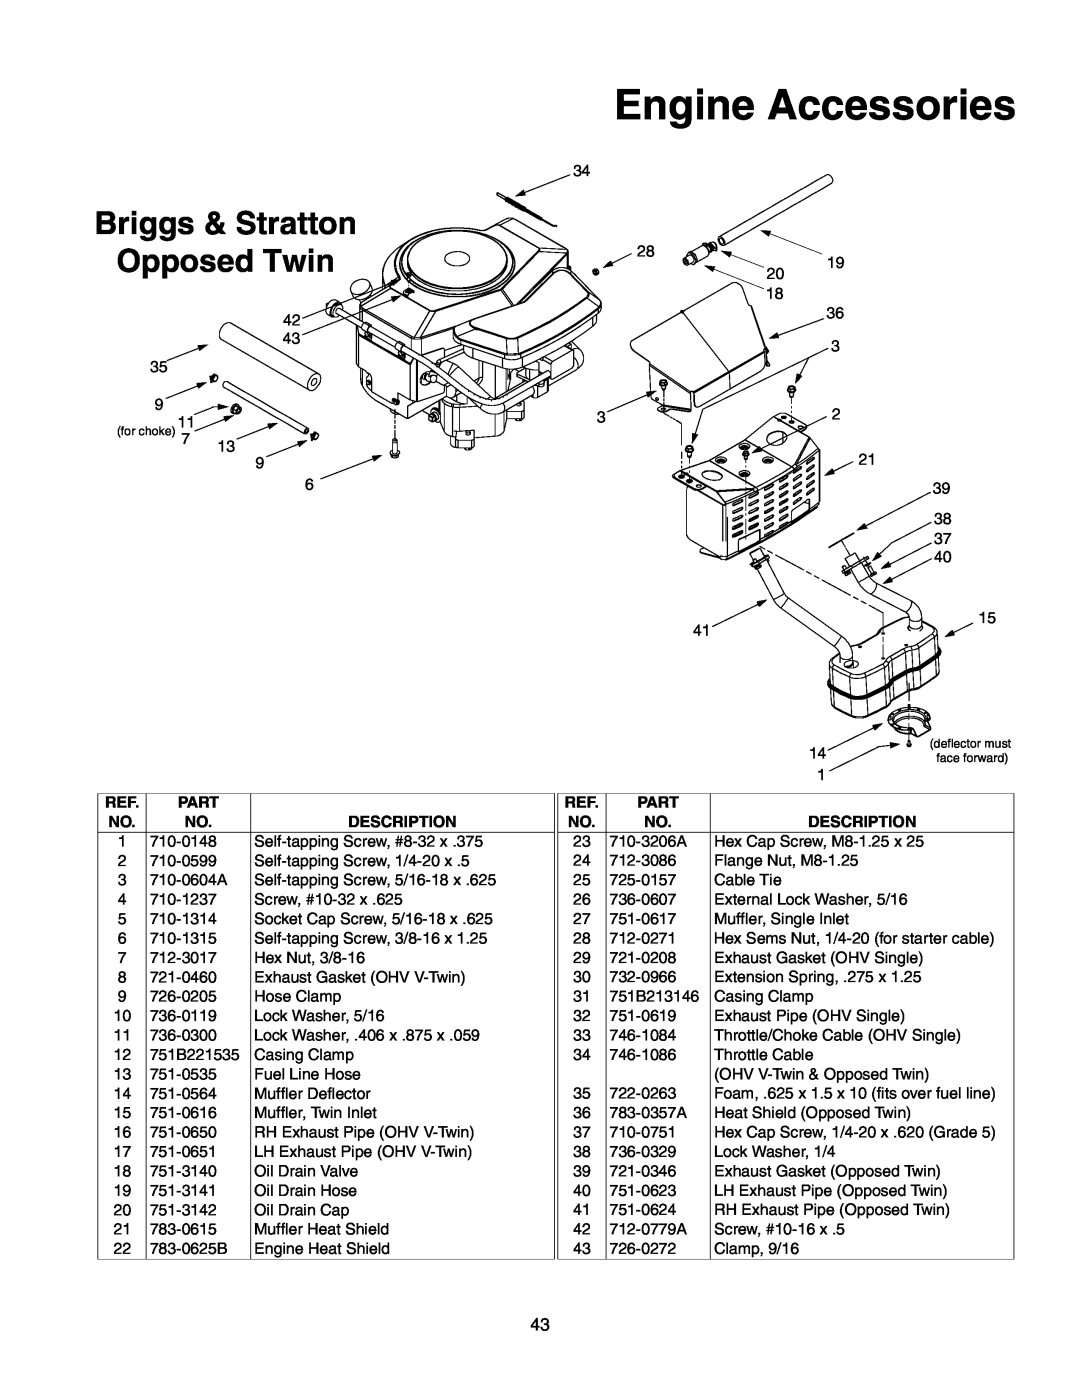 MTD 608, 609 manual Engine Accessories, Briggs & Stratton Opposed Twin 